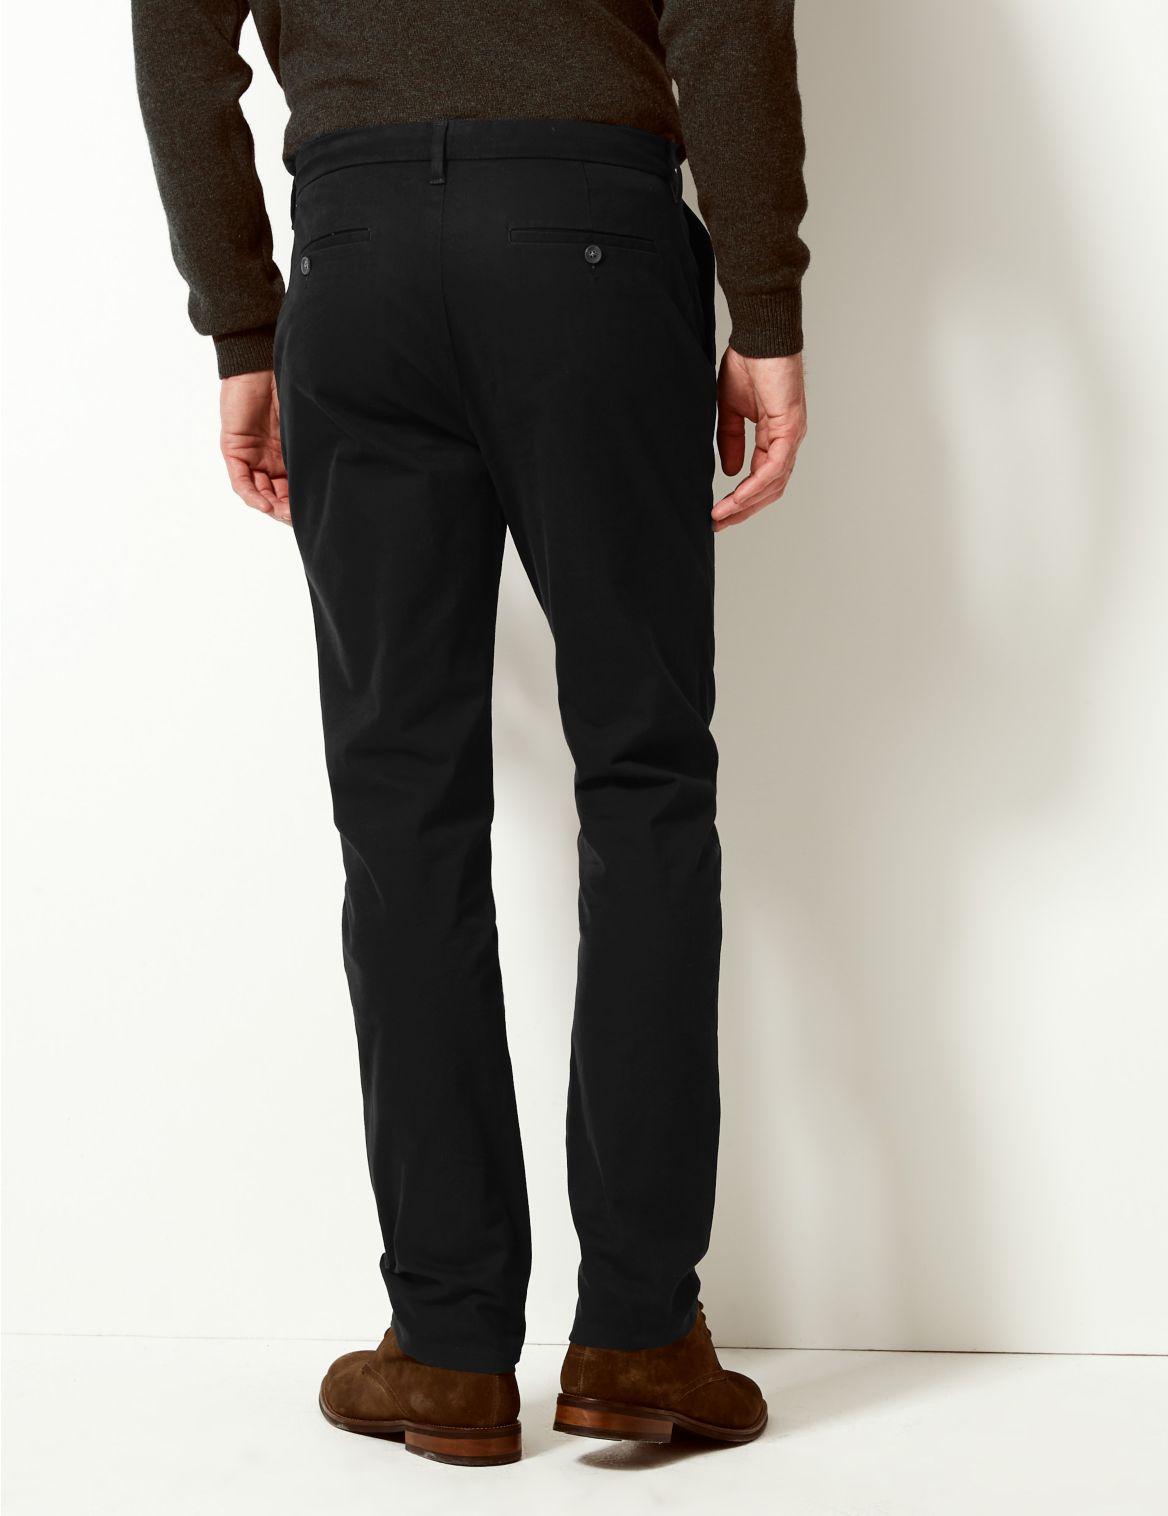 Marks & Spencer Cotton Slim Fit Chinos With Stretch in Black for Men - Lyst